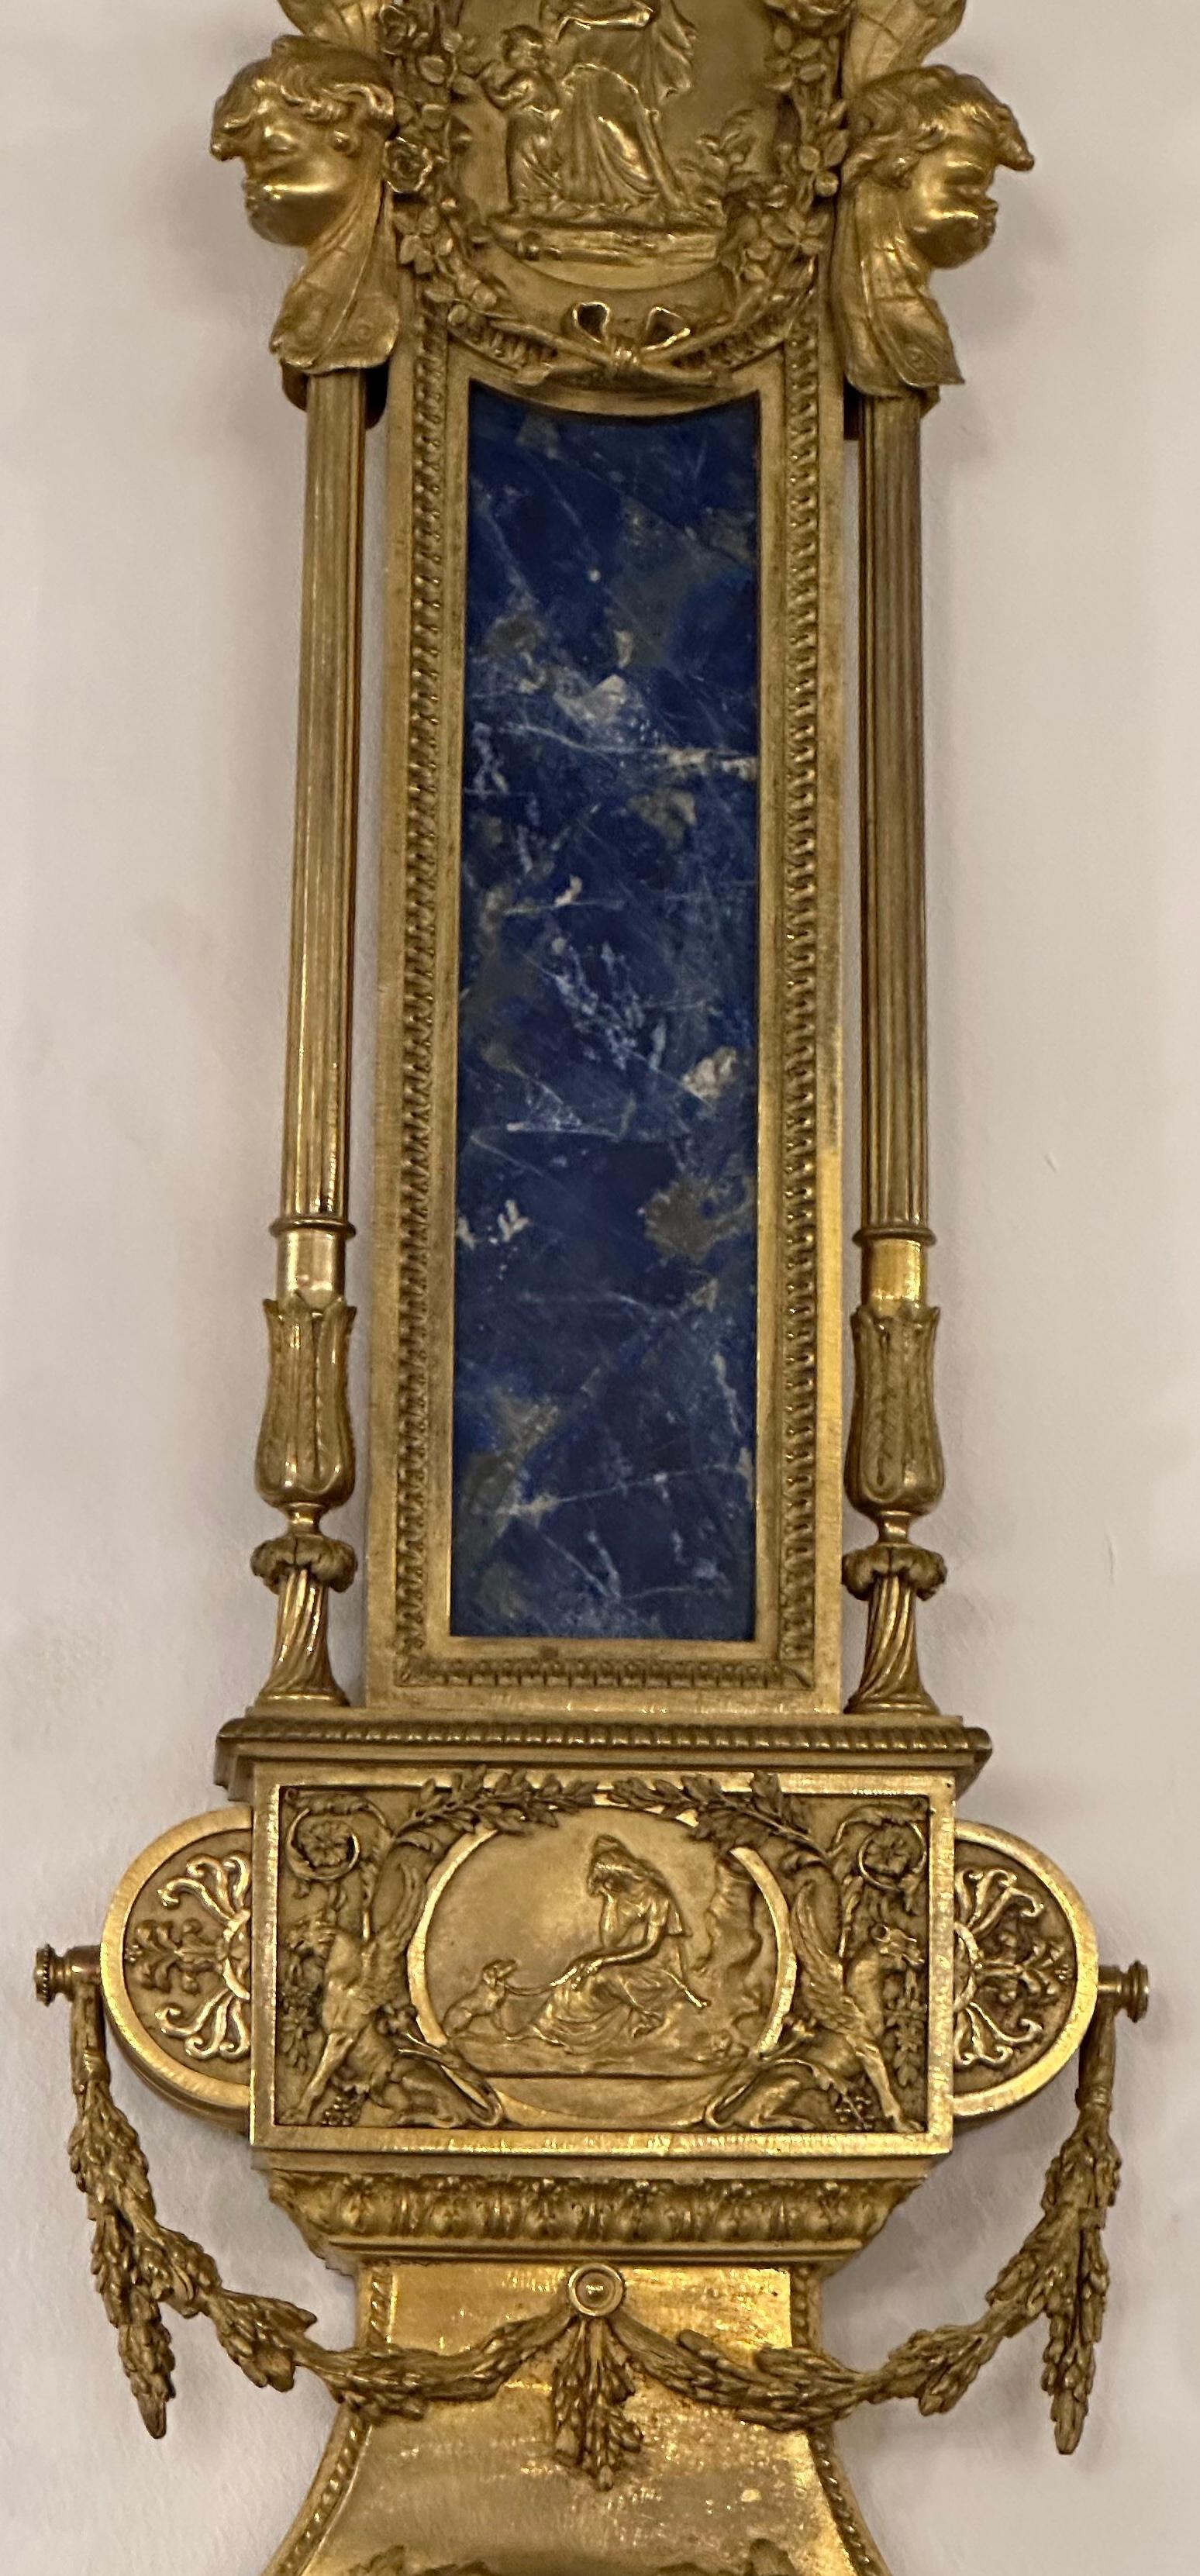  19th Century French Wall Clock In Lapis Lazuli By Paul Sormani In Good Condition For Sale In Southall, GB